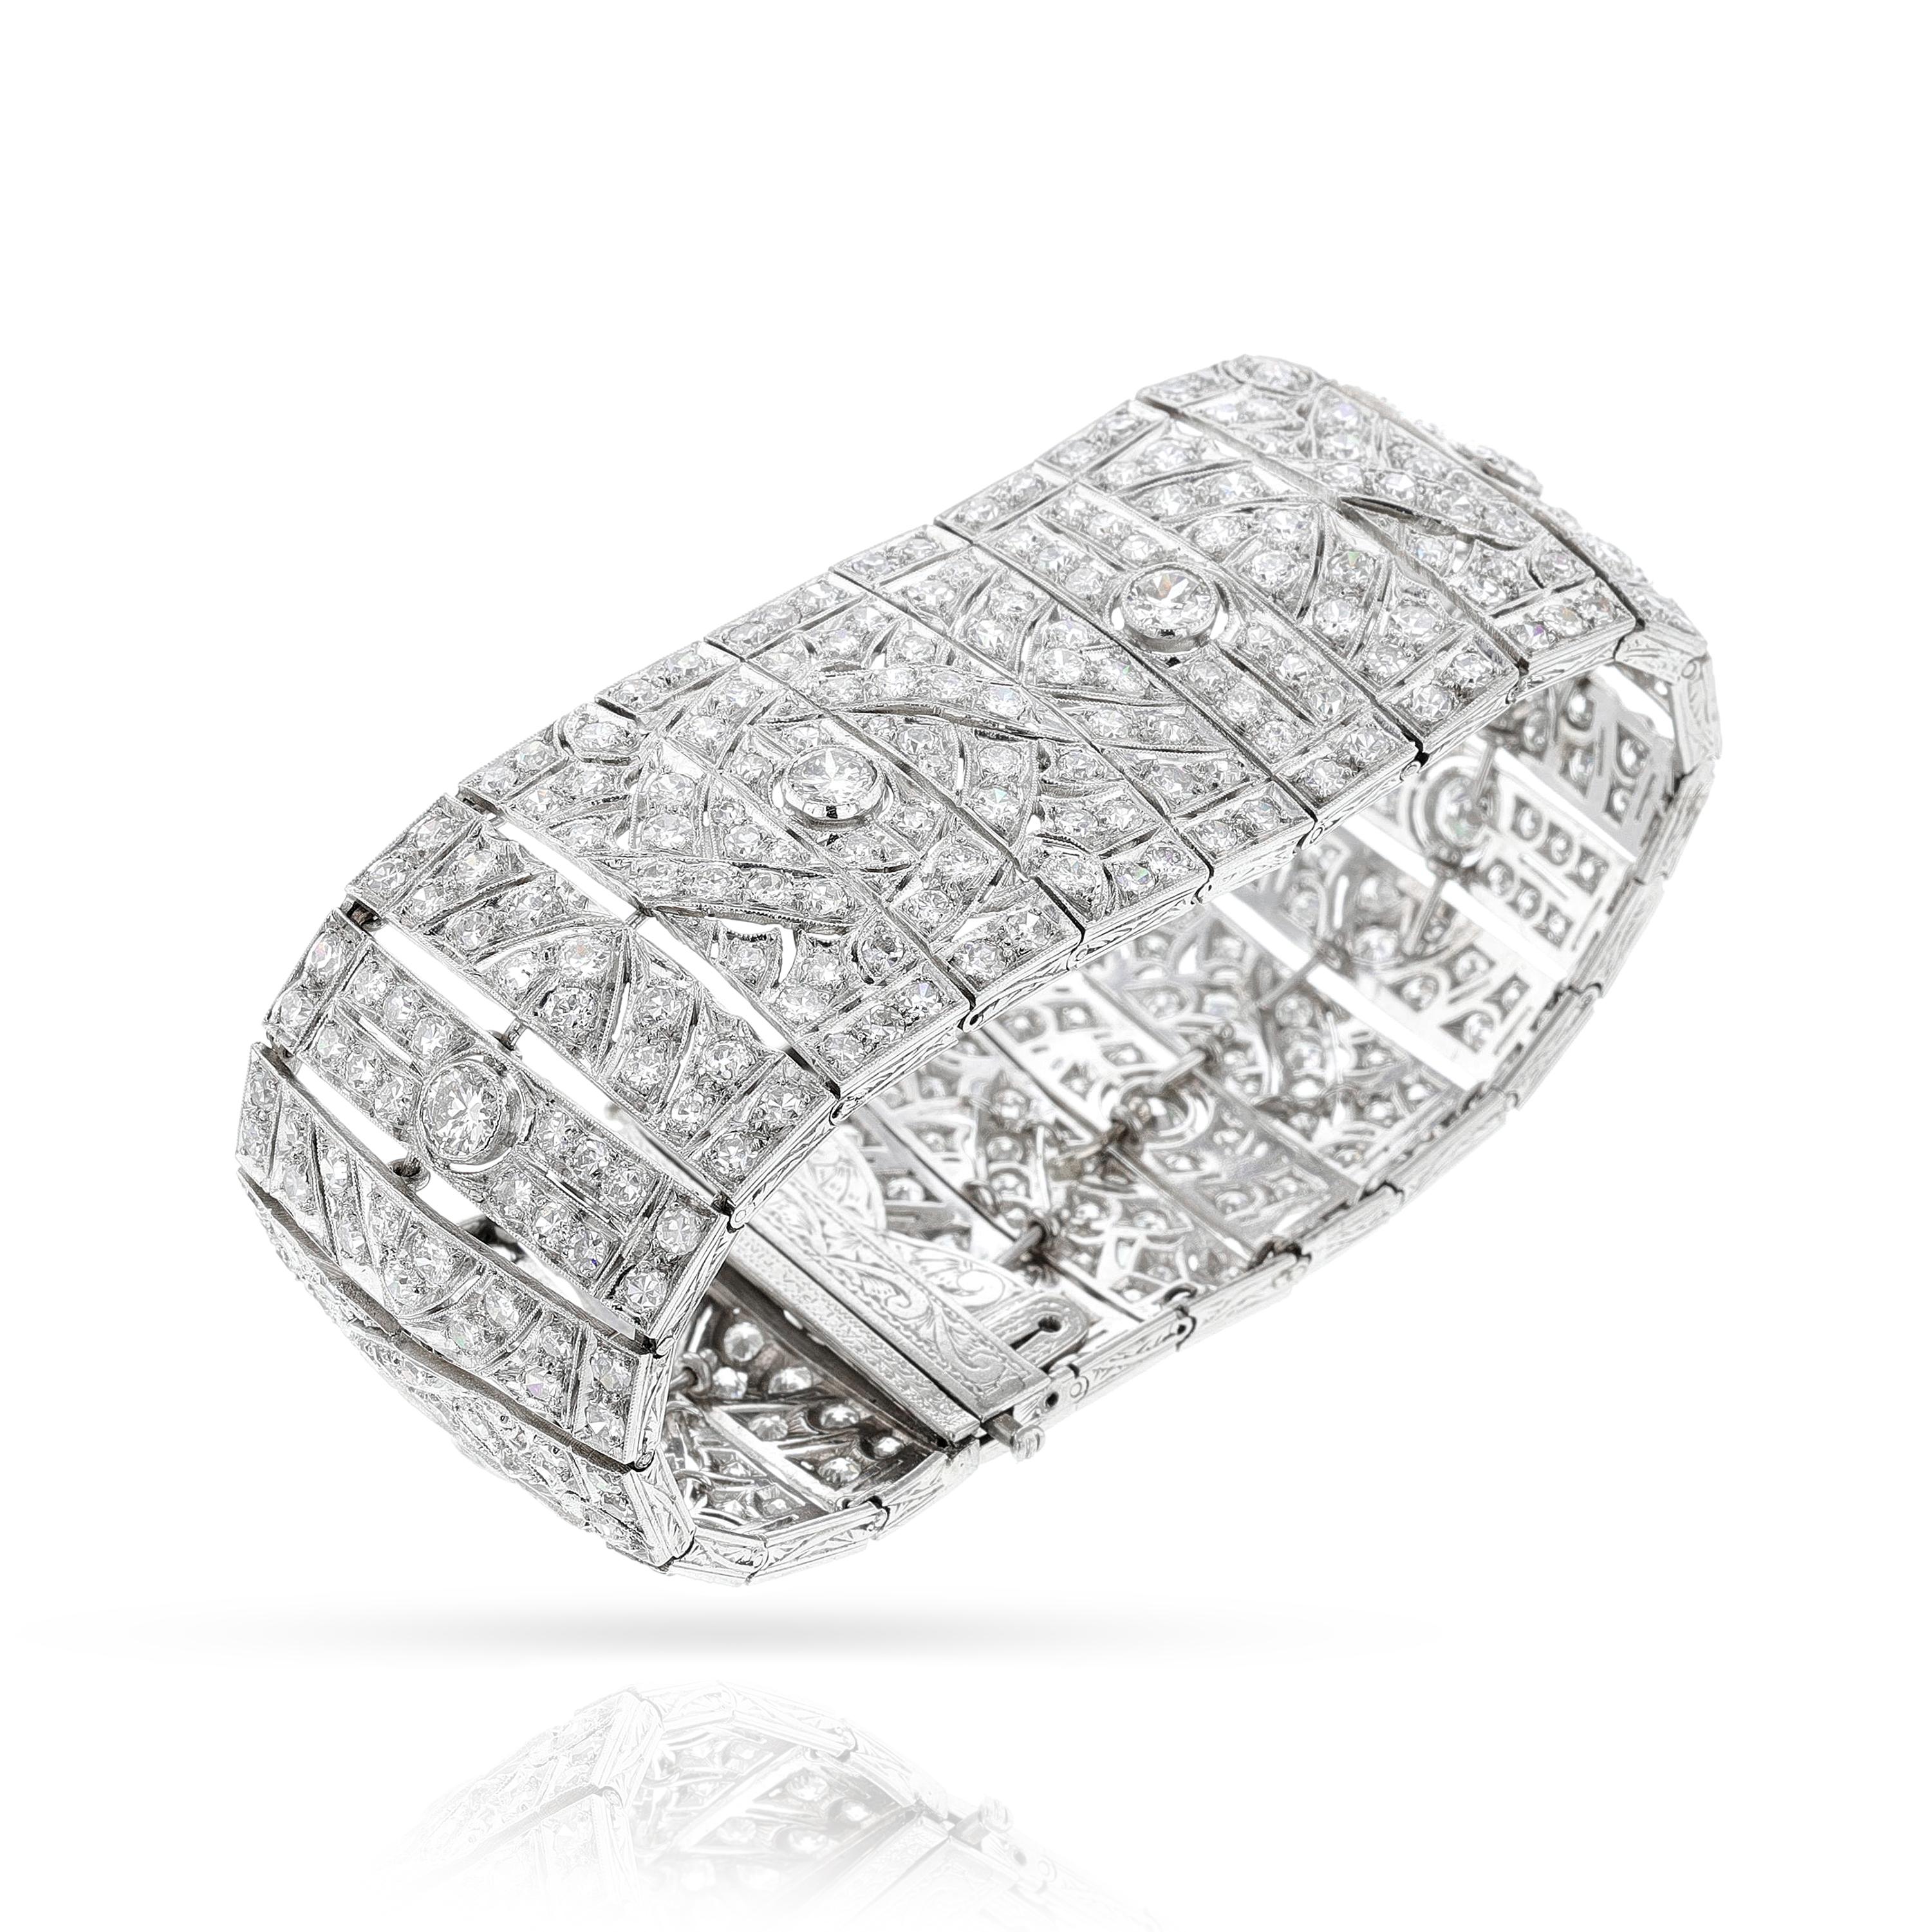 Wide Platinum Diamond Art Deco Bracelet In Excellent Condition For Sale In New York, NY